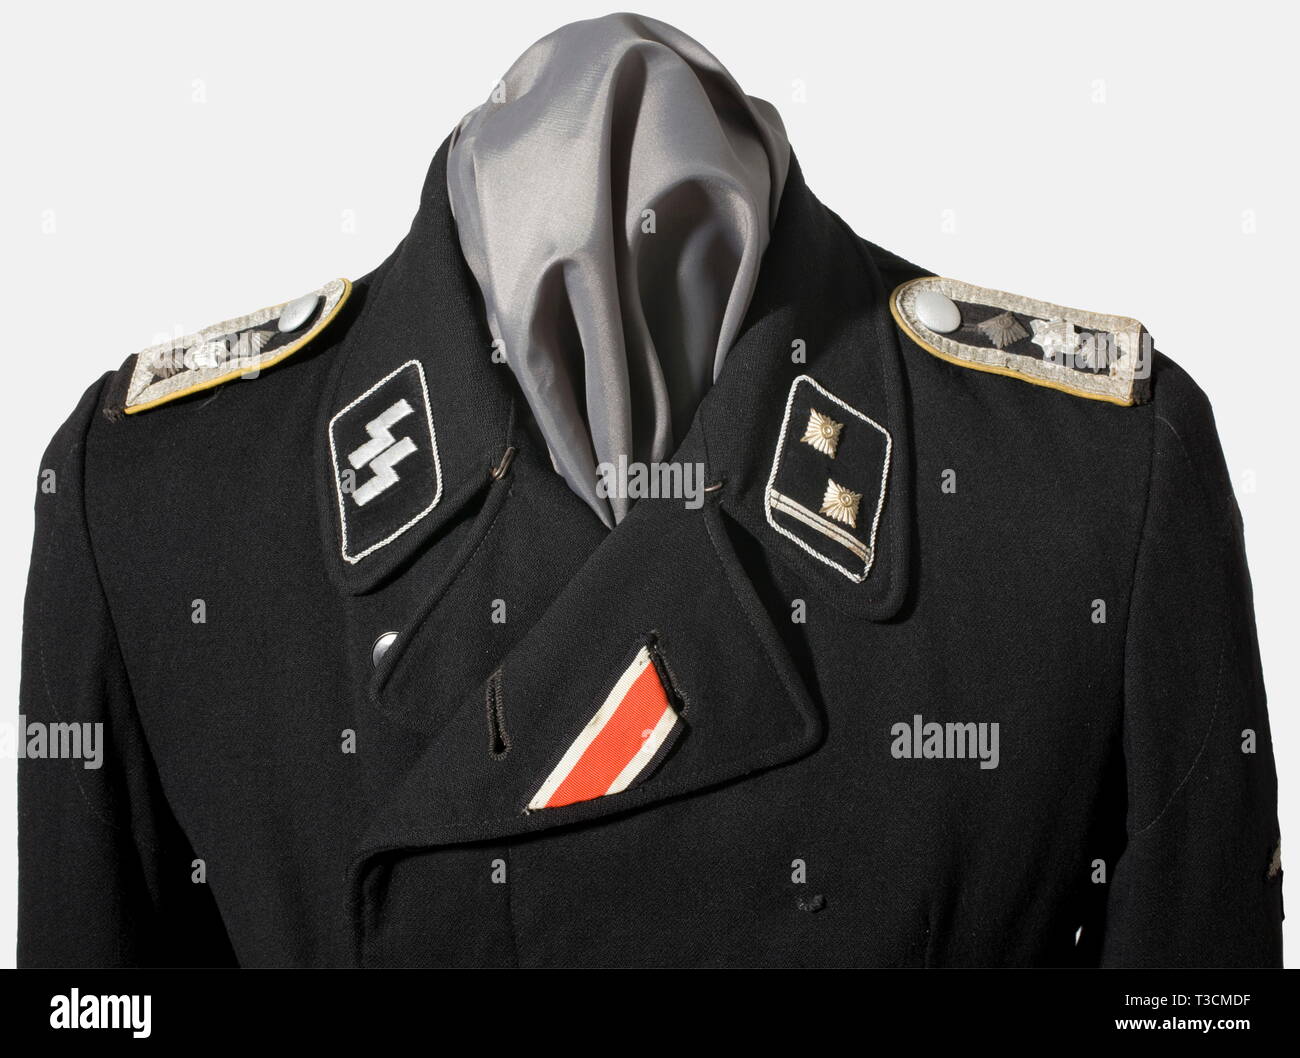 A field tunic for a Hauptscharführer, with the Armoured Reconnaissance Battalion of the SS-Leibstandarte 'Adolf Hitler' Black wool panzer troop uniform tunic, with black lining (repaired in places, added selvage). Black synthetic resin buttons (various). Iron Cross buttonhole ribbon and medal loops, Black collar patches with silver piping for an SS-officer, the right with silver embroidered runes, the left with metal stars (upgraded) and rank lace. Black felt sleeve mounted shoulder boards, with black net backing, silver lace, golden yellow piping, and the rare small versio, Editorial-Use-Only Stock Photo